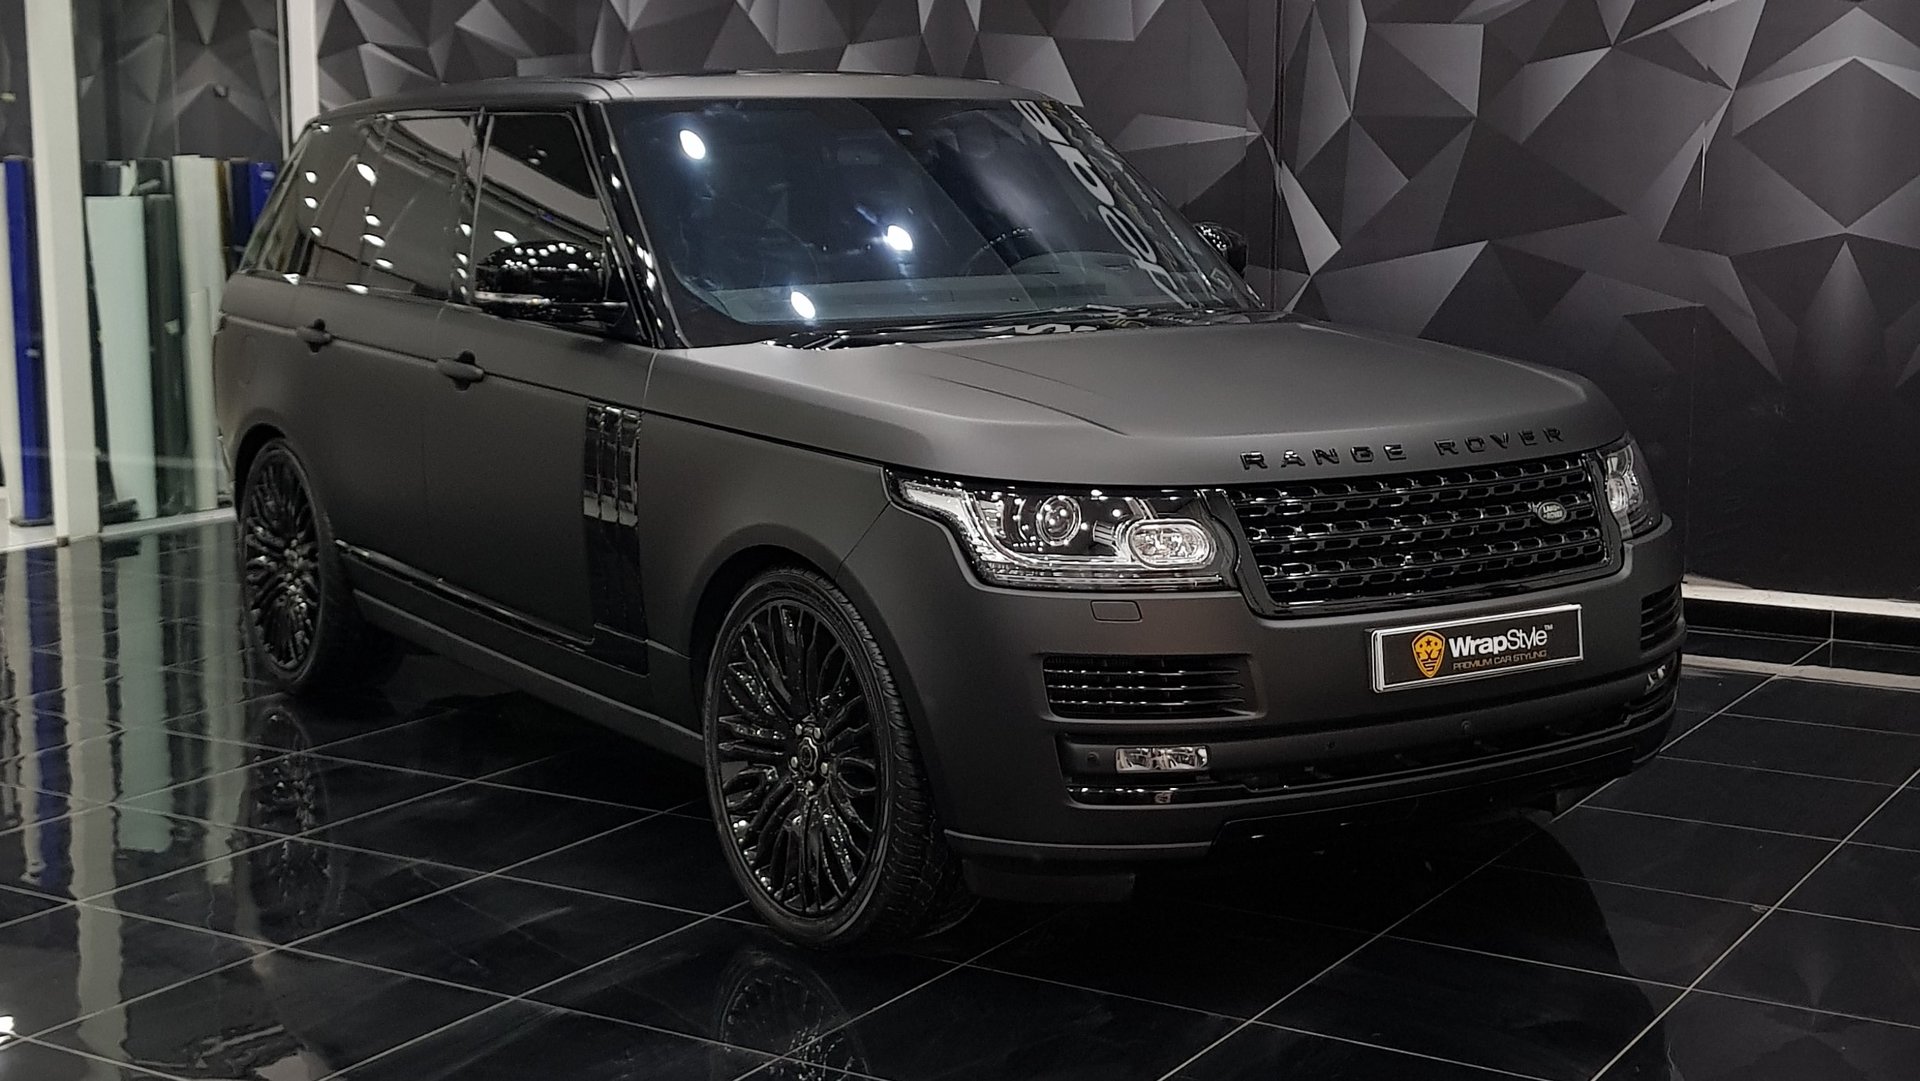 Range Rover Black Vogue  . The Svautobiography Dynamic Black Edition Is Enhanced With Unique Black Design Cues, Such As Santorini Black Paint With Narvik Black Accents And An Ebony Interior With Pimento Stitching.